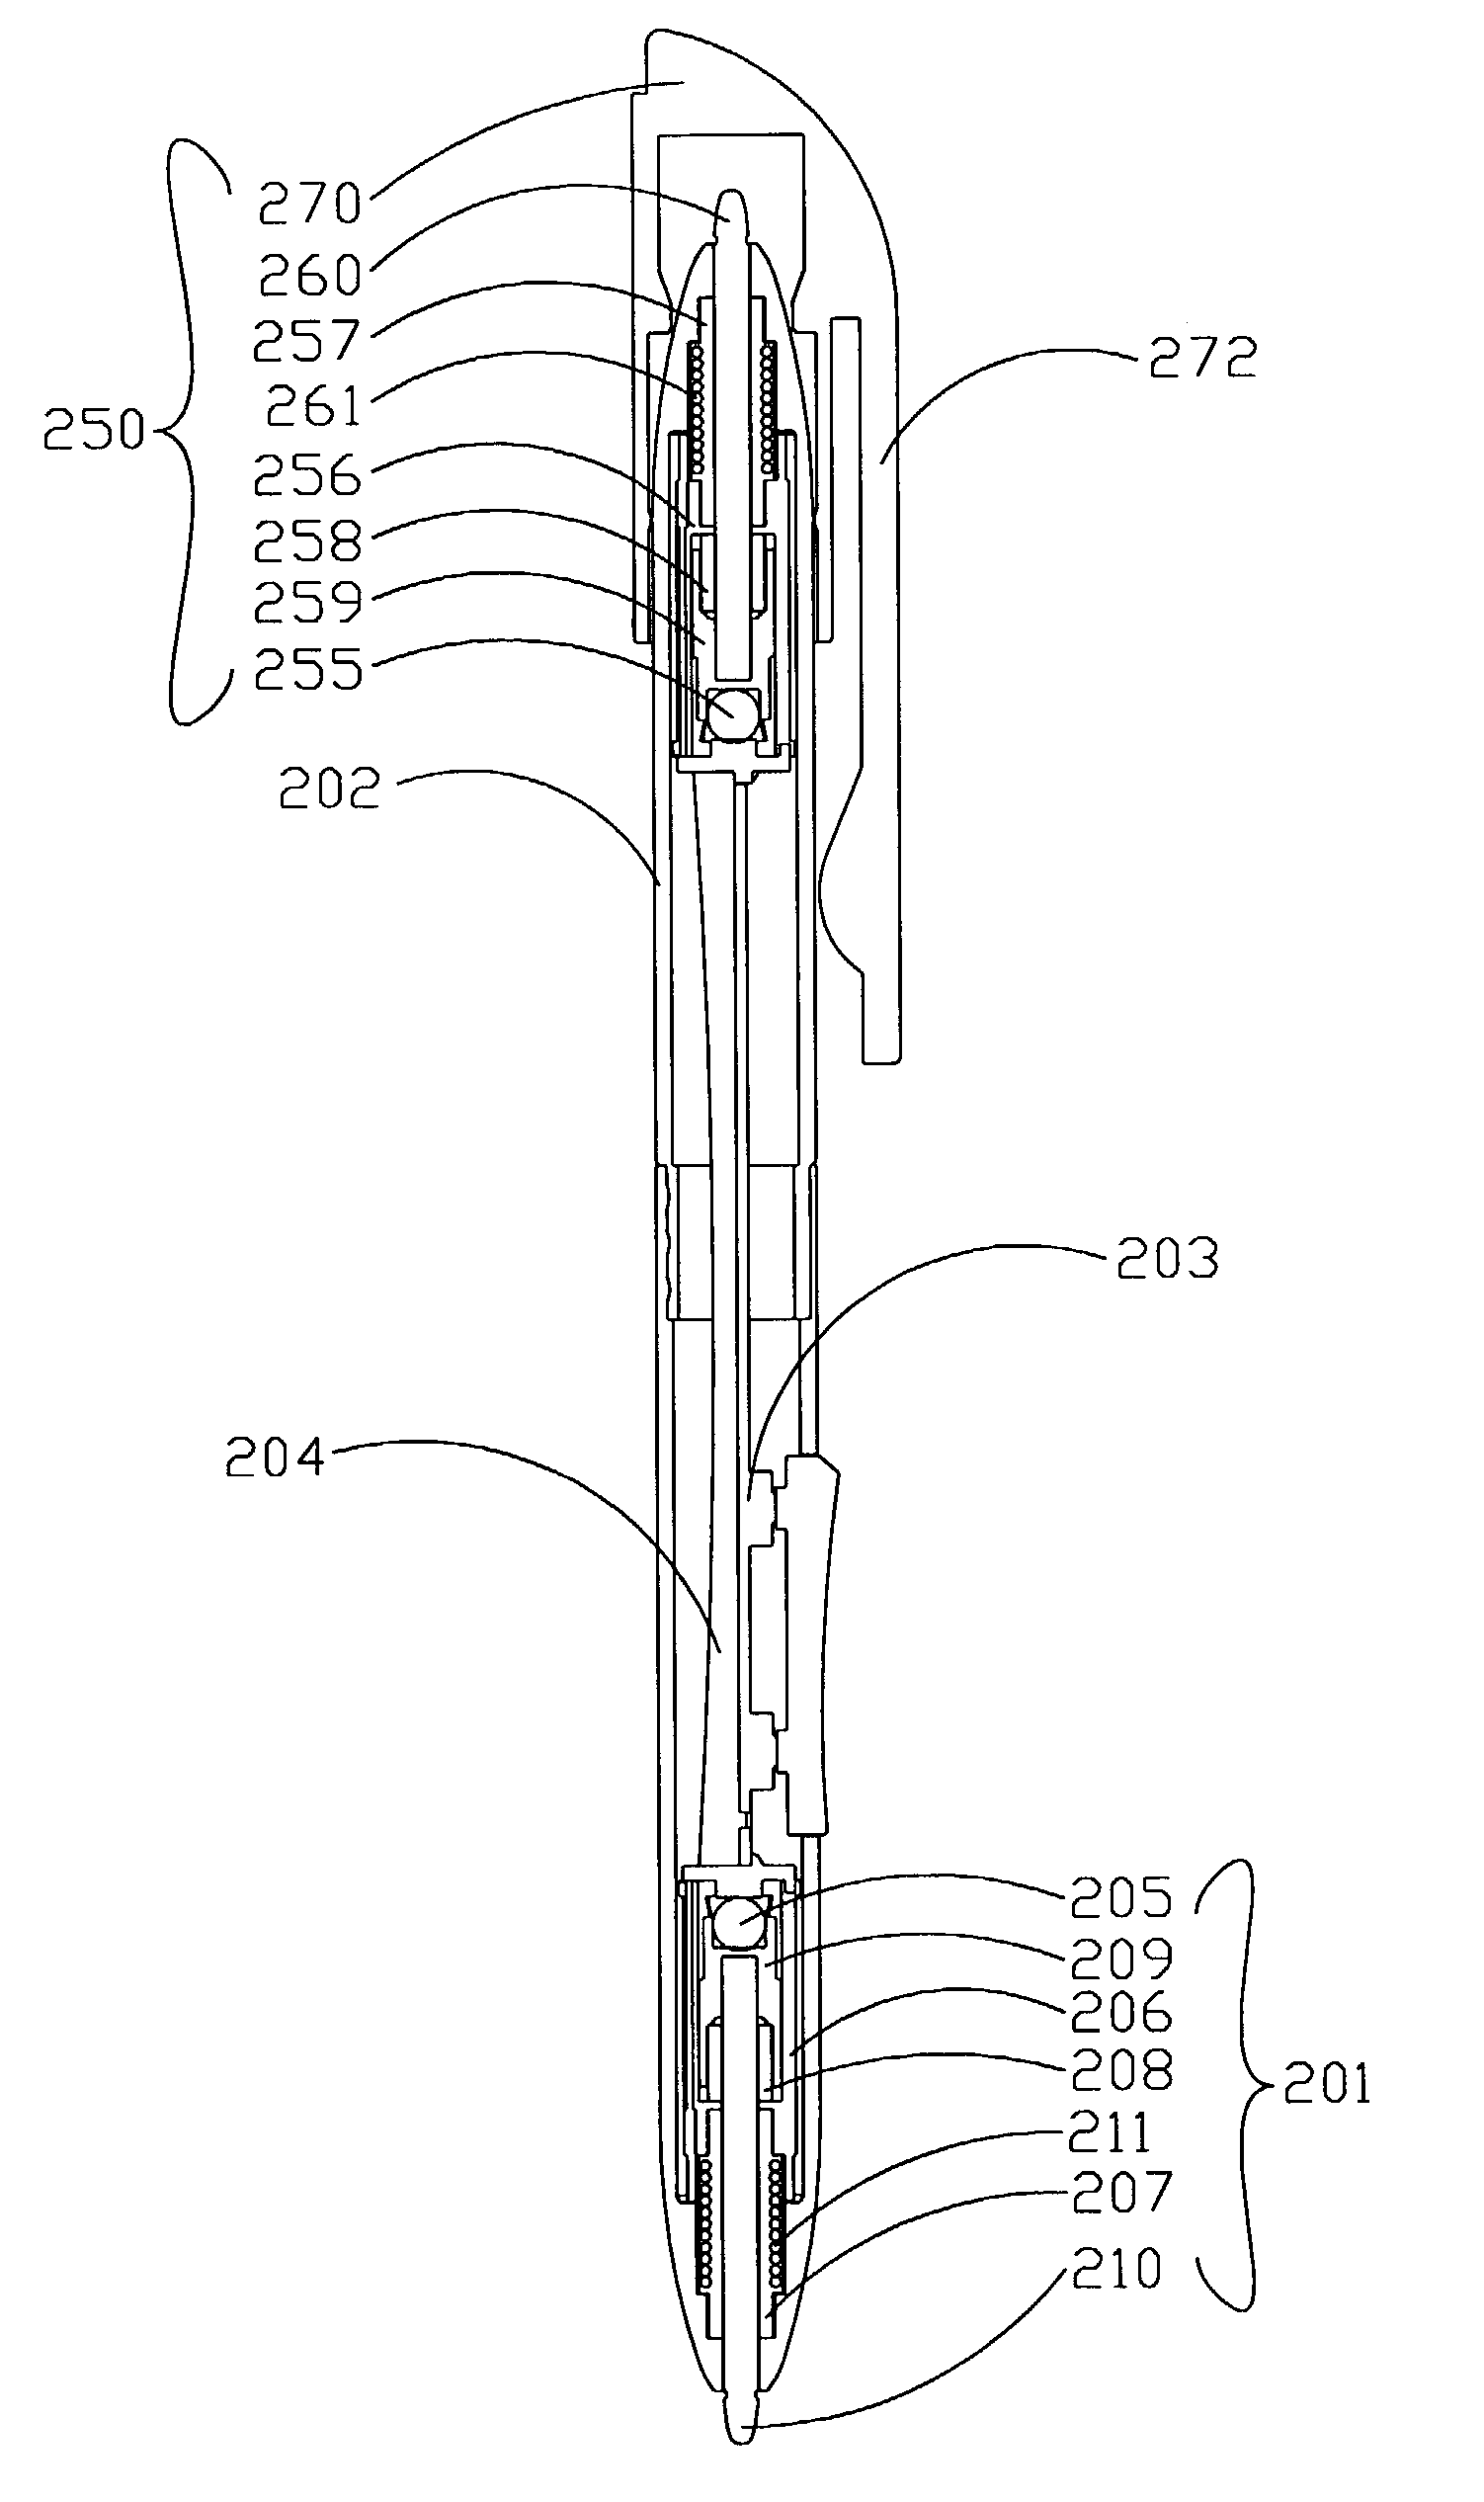 Electromagnetic induction pen-like device with writing function